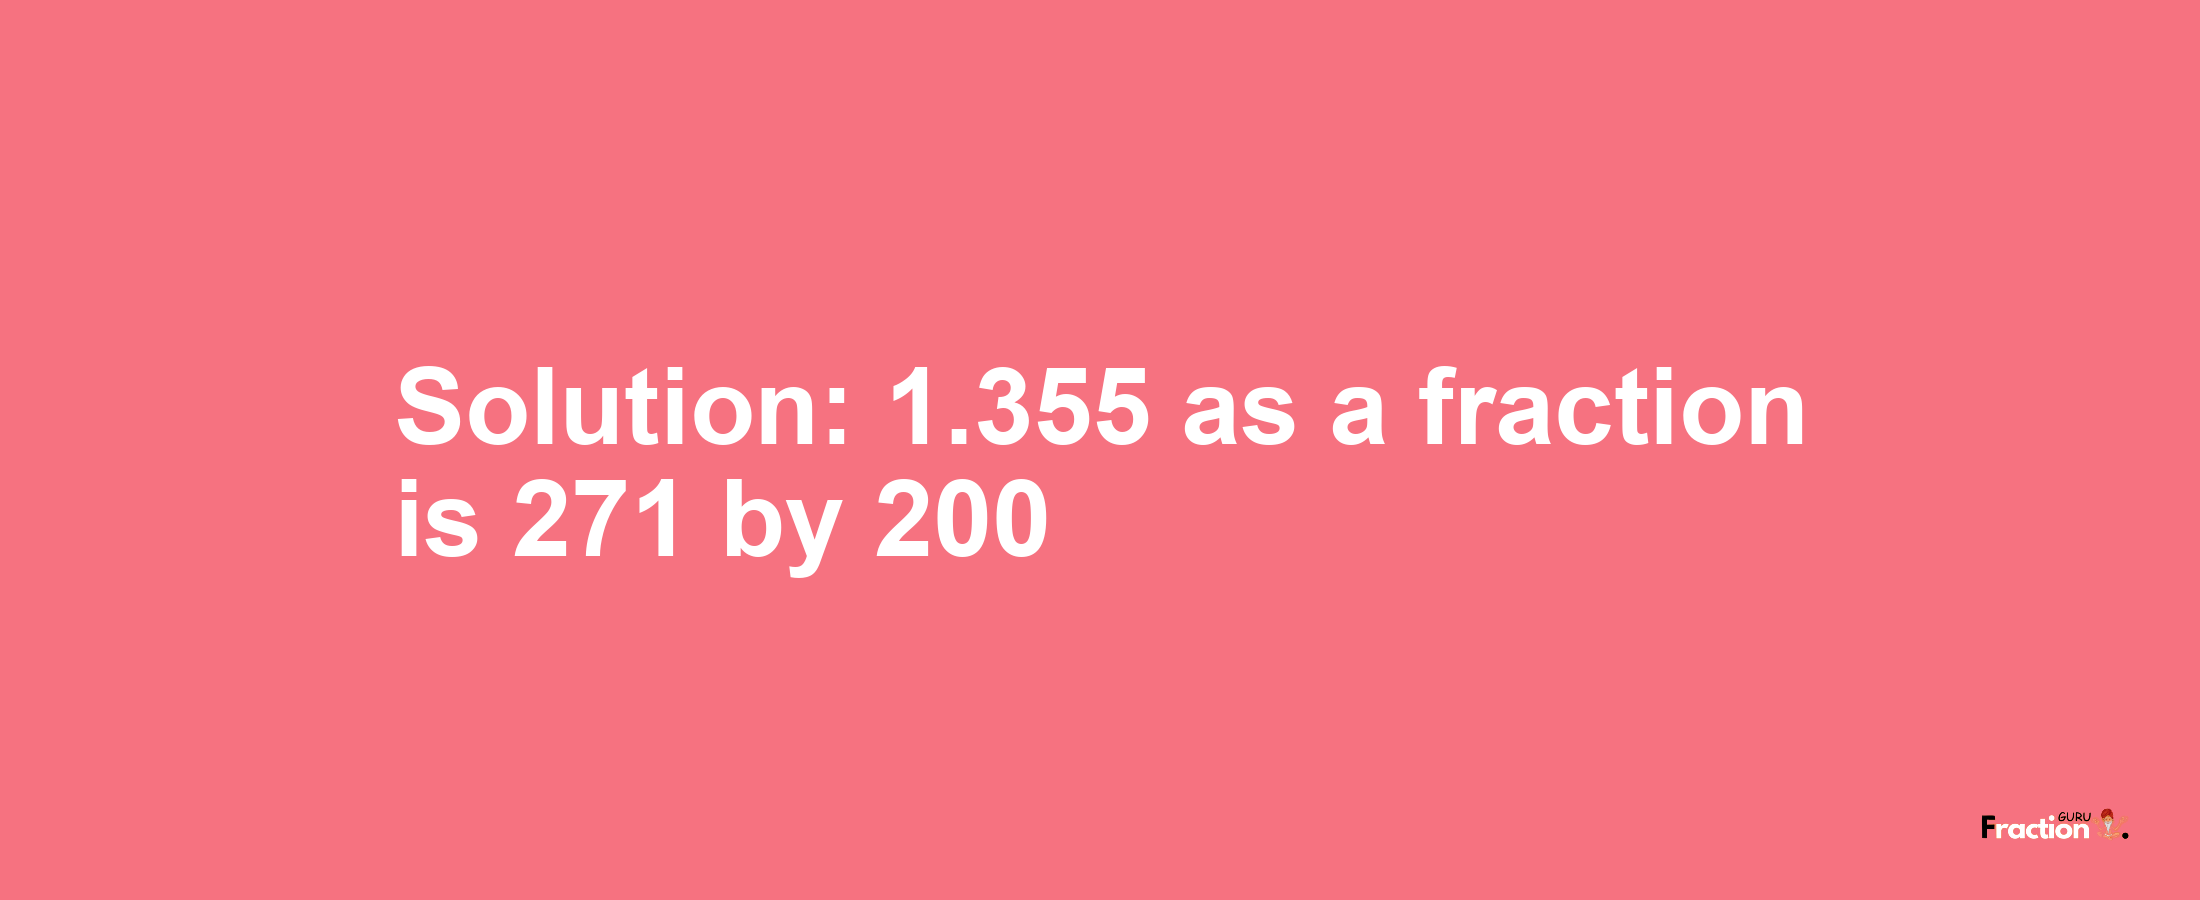 Solution:1.355 as a fraction is 271/200